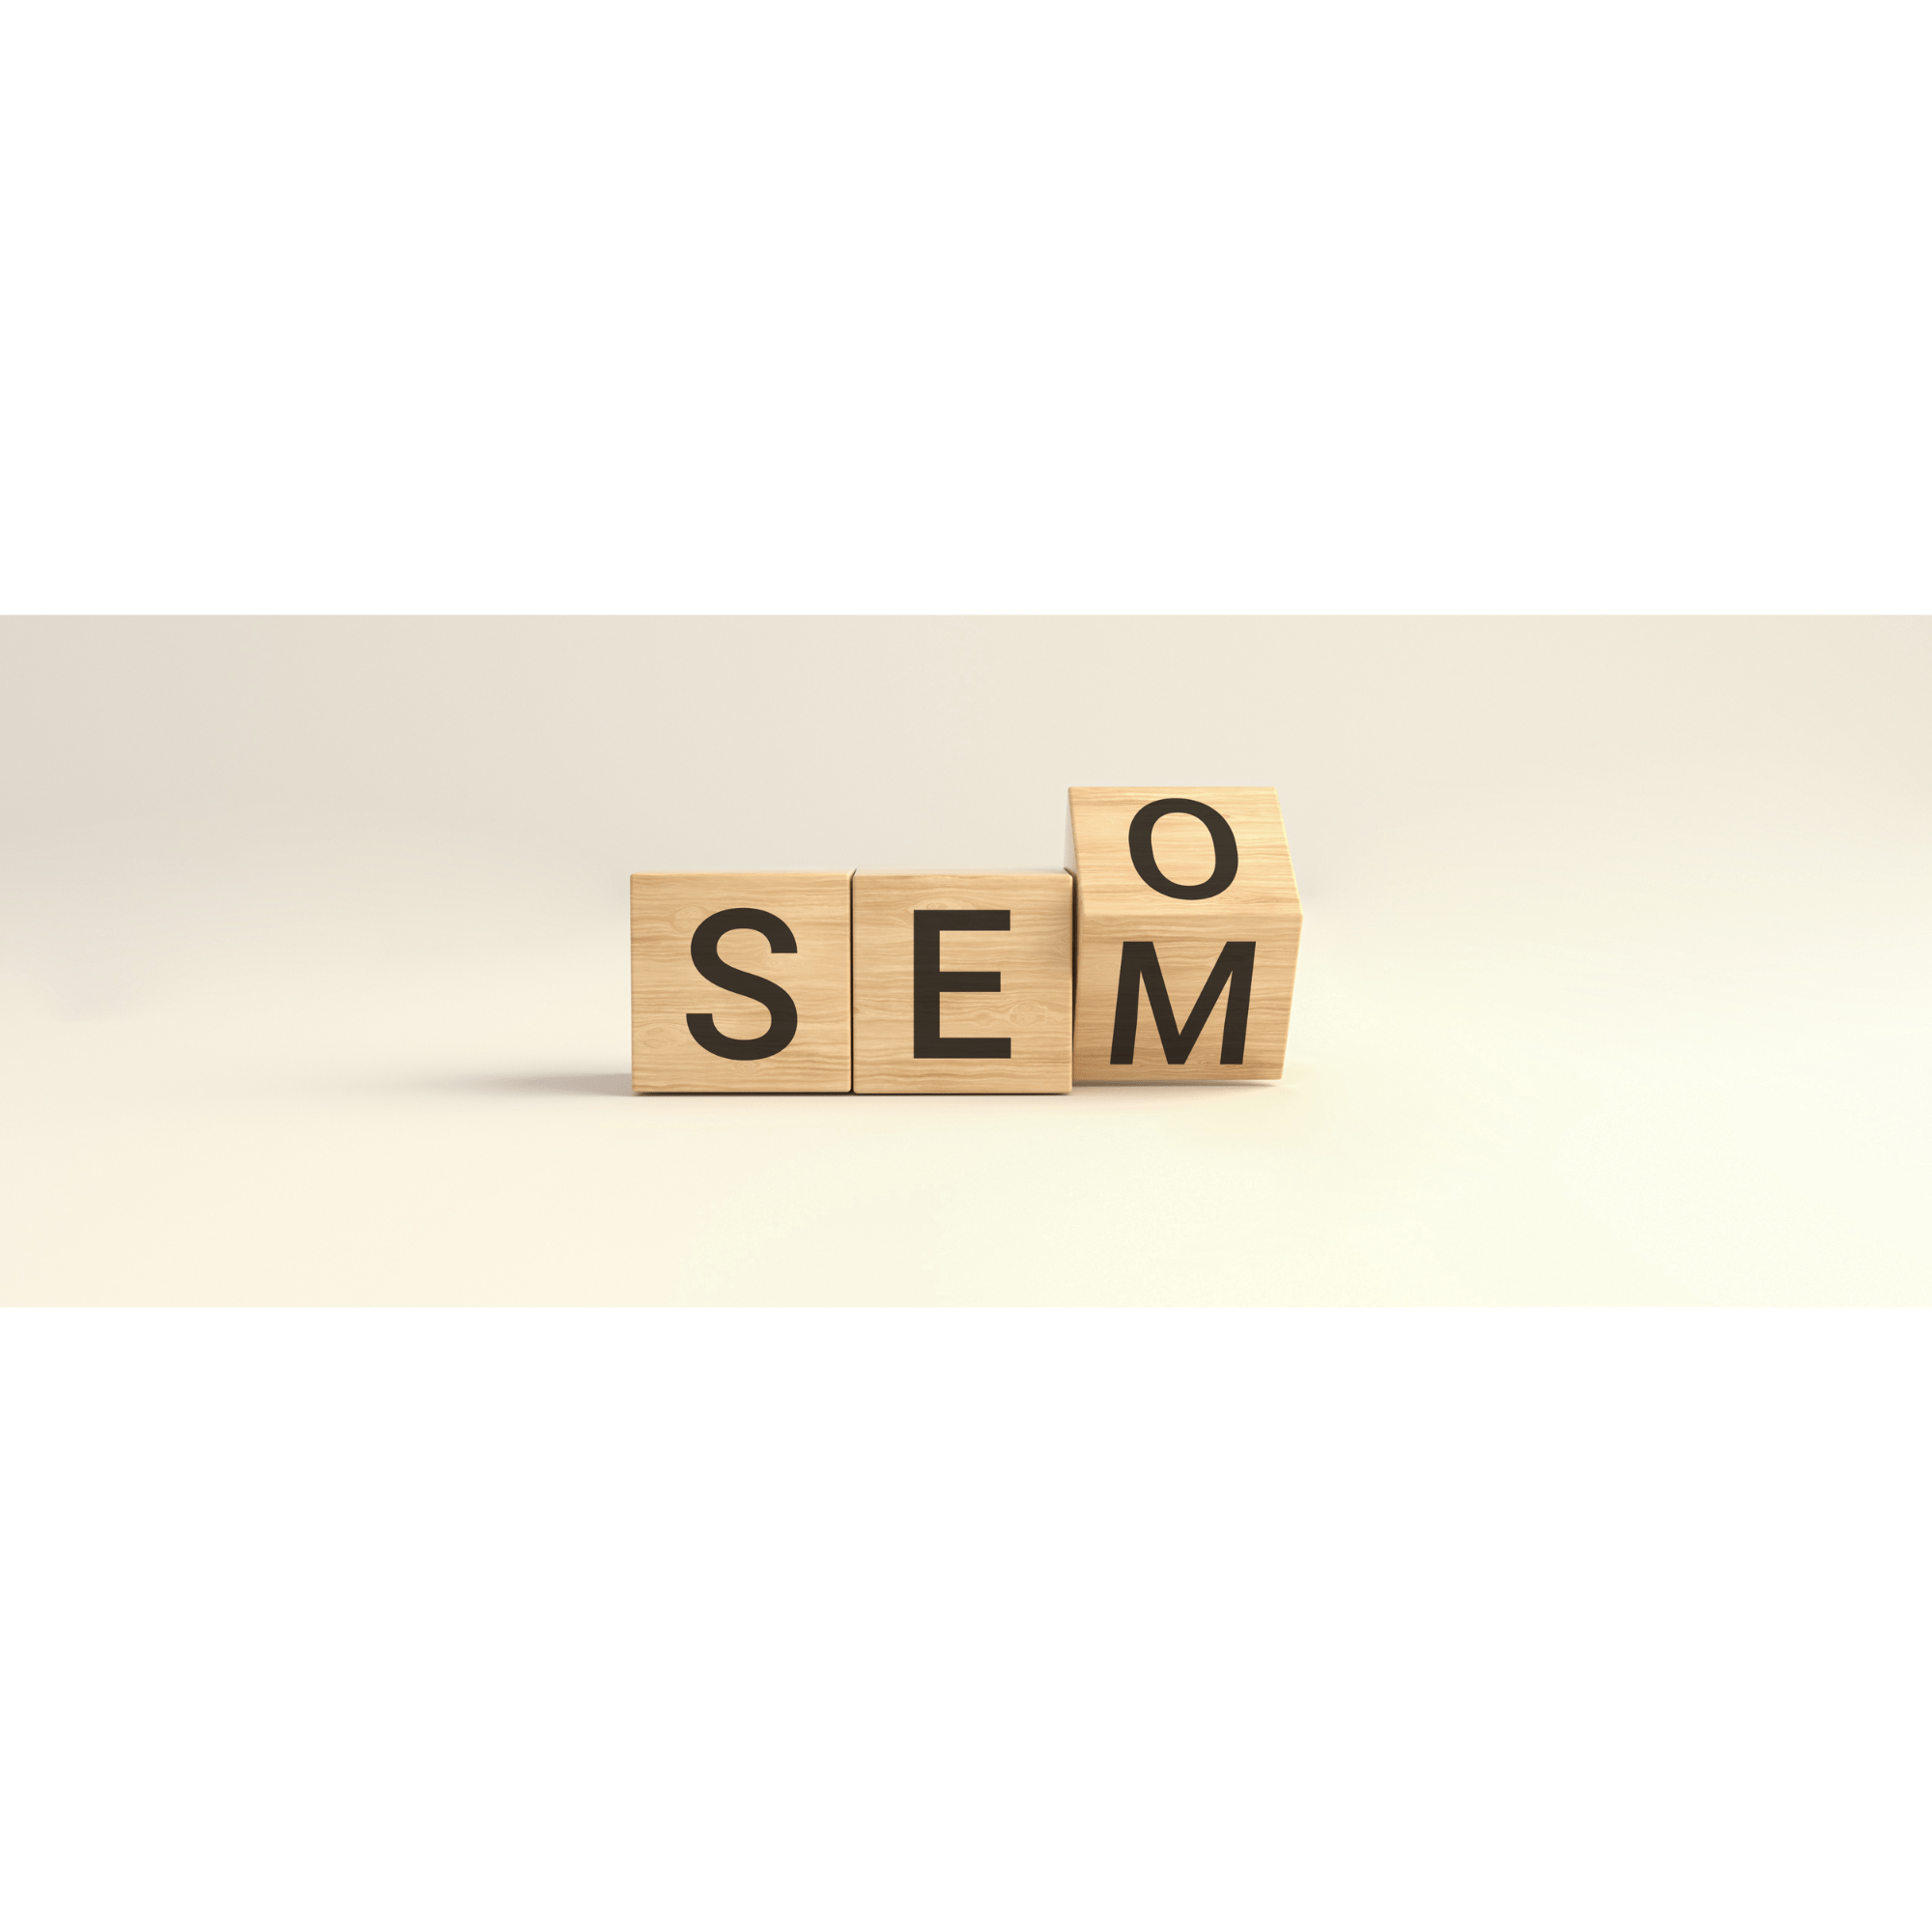 SEO AND SEM: HOW TO OPTIMIZE YOUR DIGITAL PRESENCE FOR SEARCH ENGINES